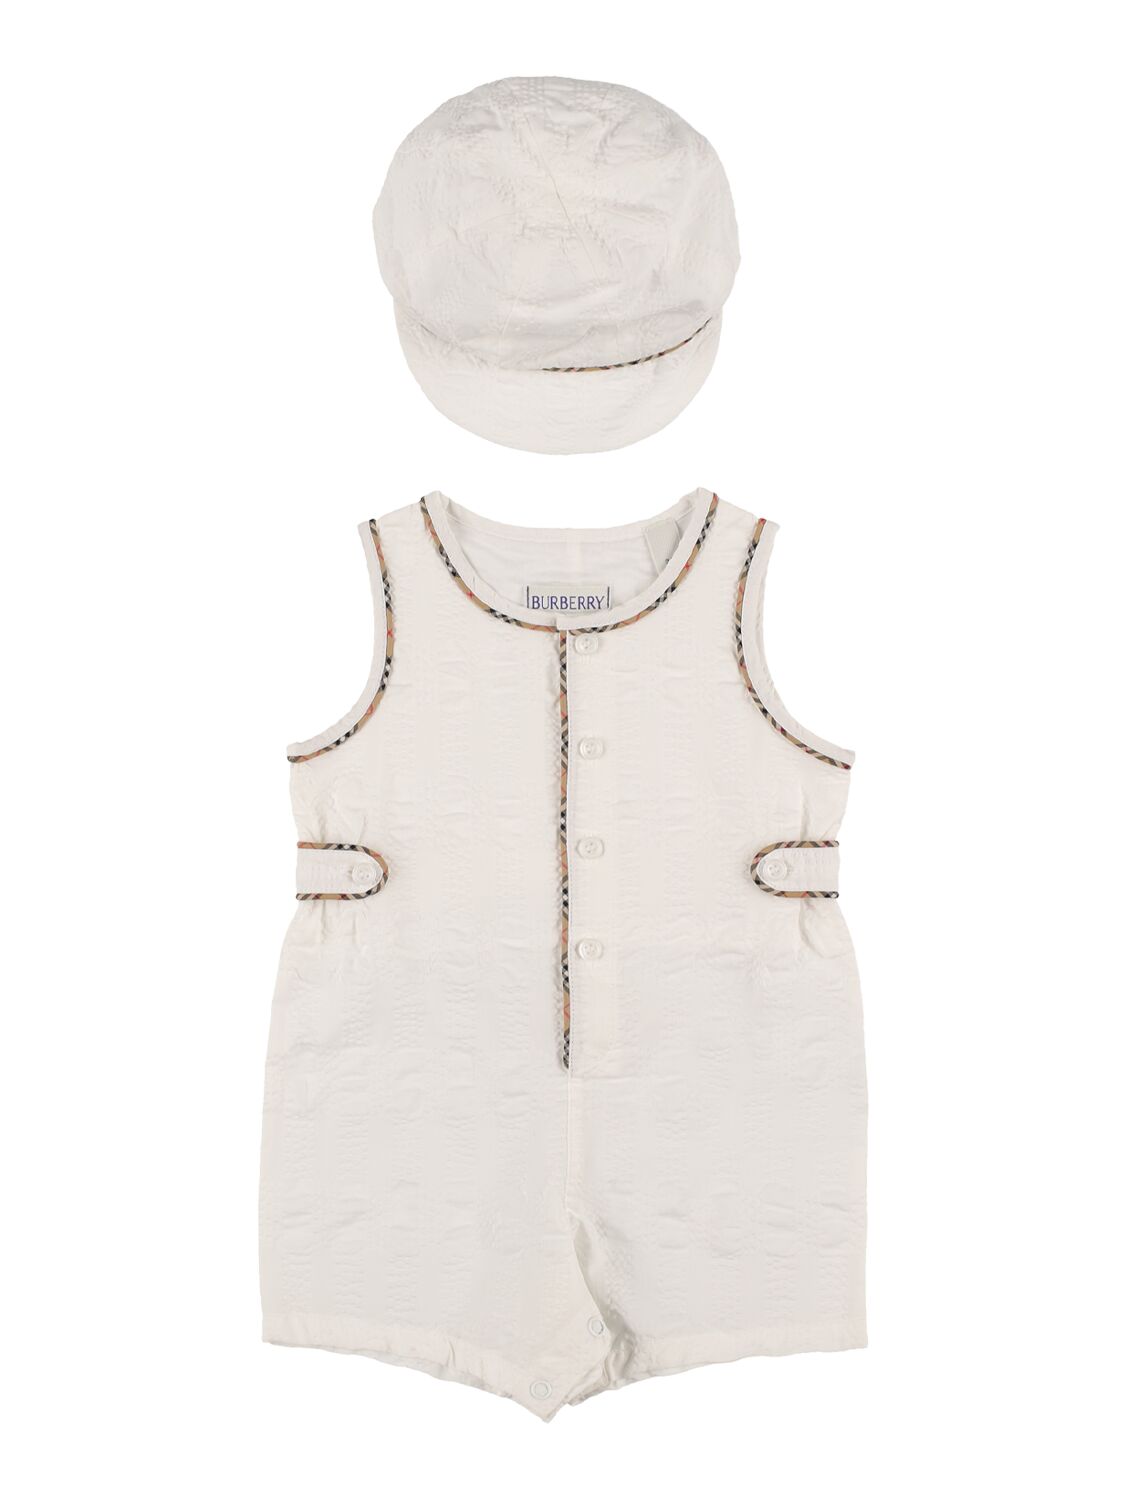 Burberry Babies' Cotton Jumpsuit & Hat In White